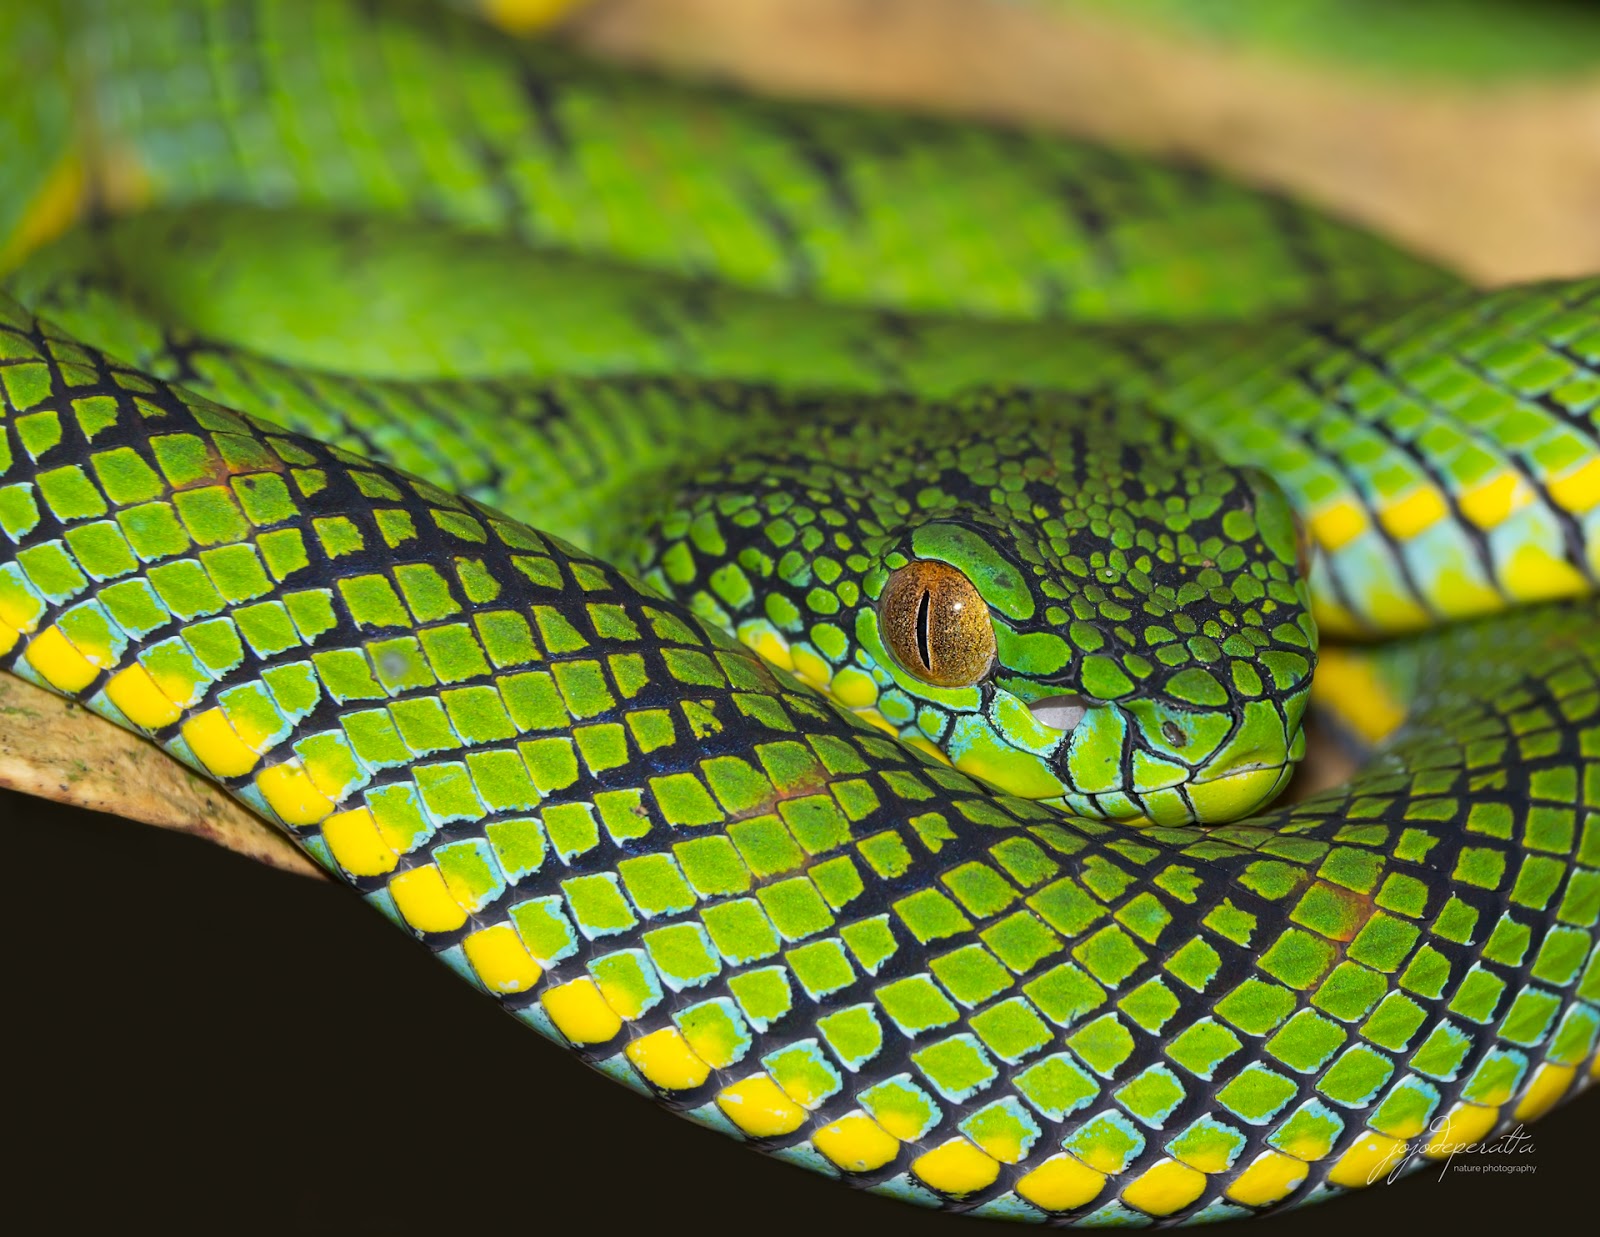 Schultz's Pit Viper - A spectacular venomous snake endemic to Palawan